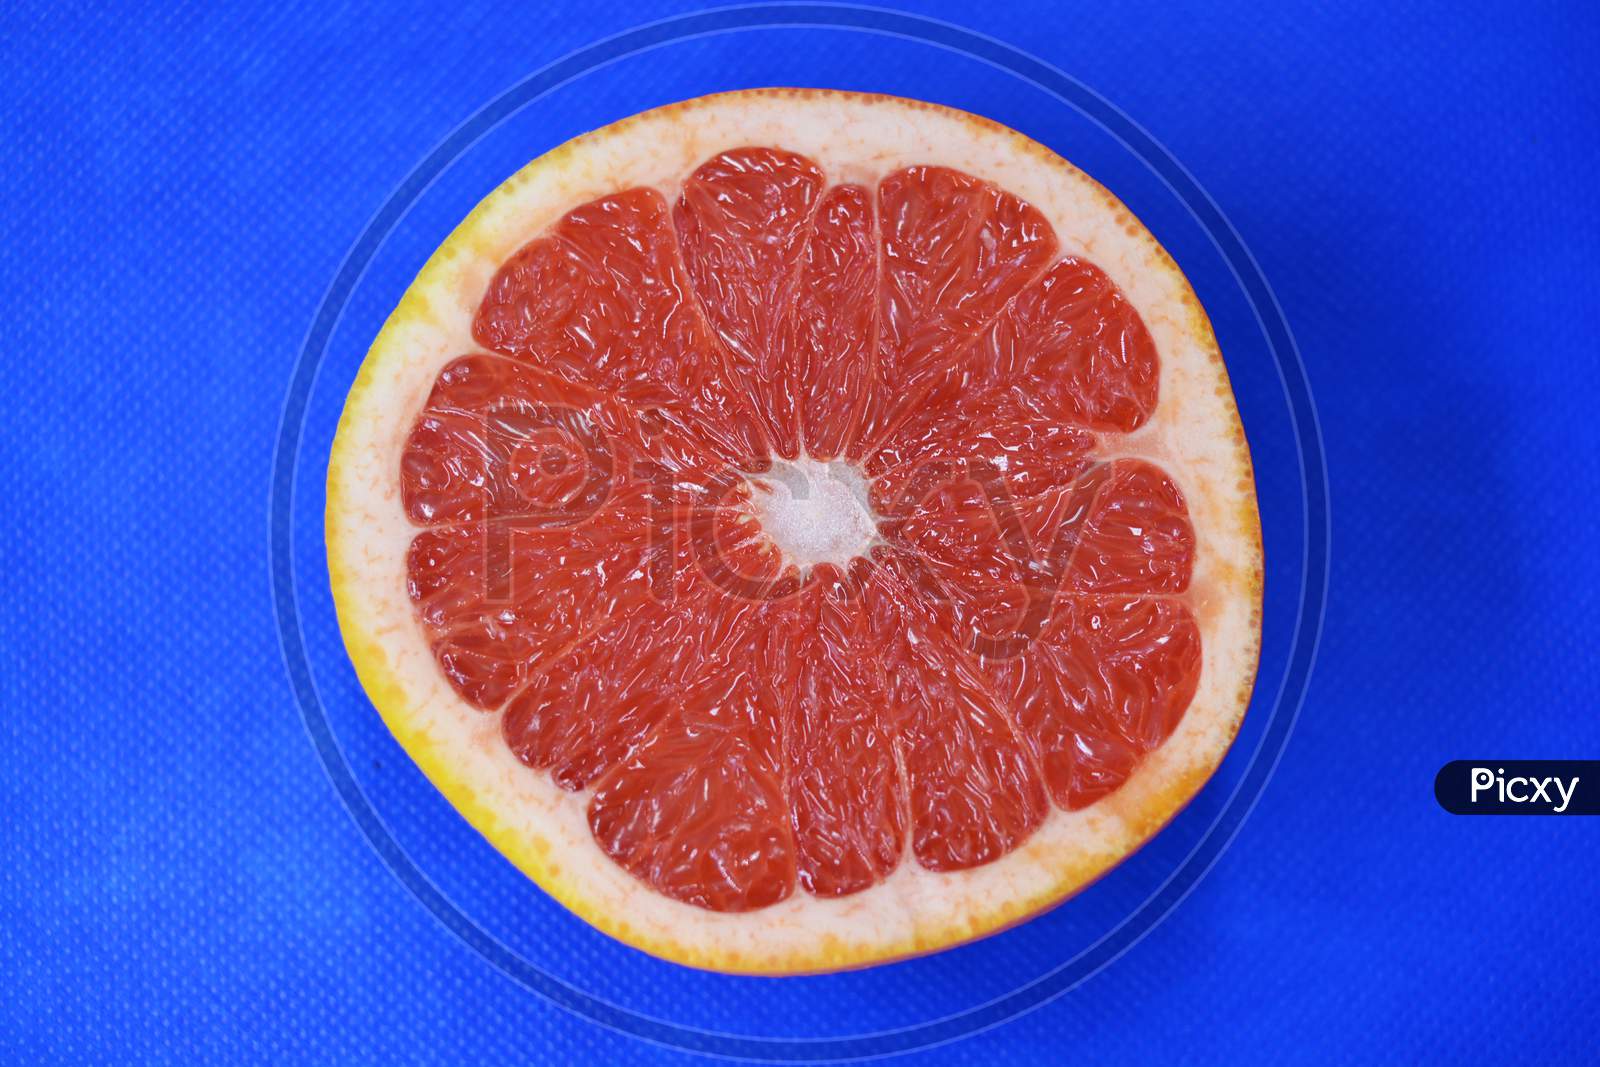 Halves of ripe juicy grapefruit, cut in half, set against a blue fabric background. Delicious and healthy sweet and sour fruits for the human body and health.